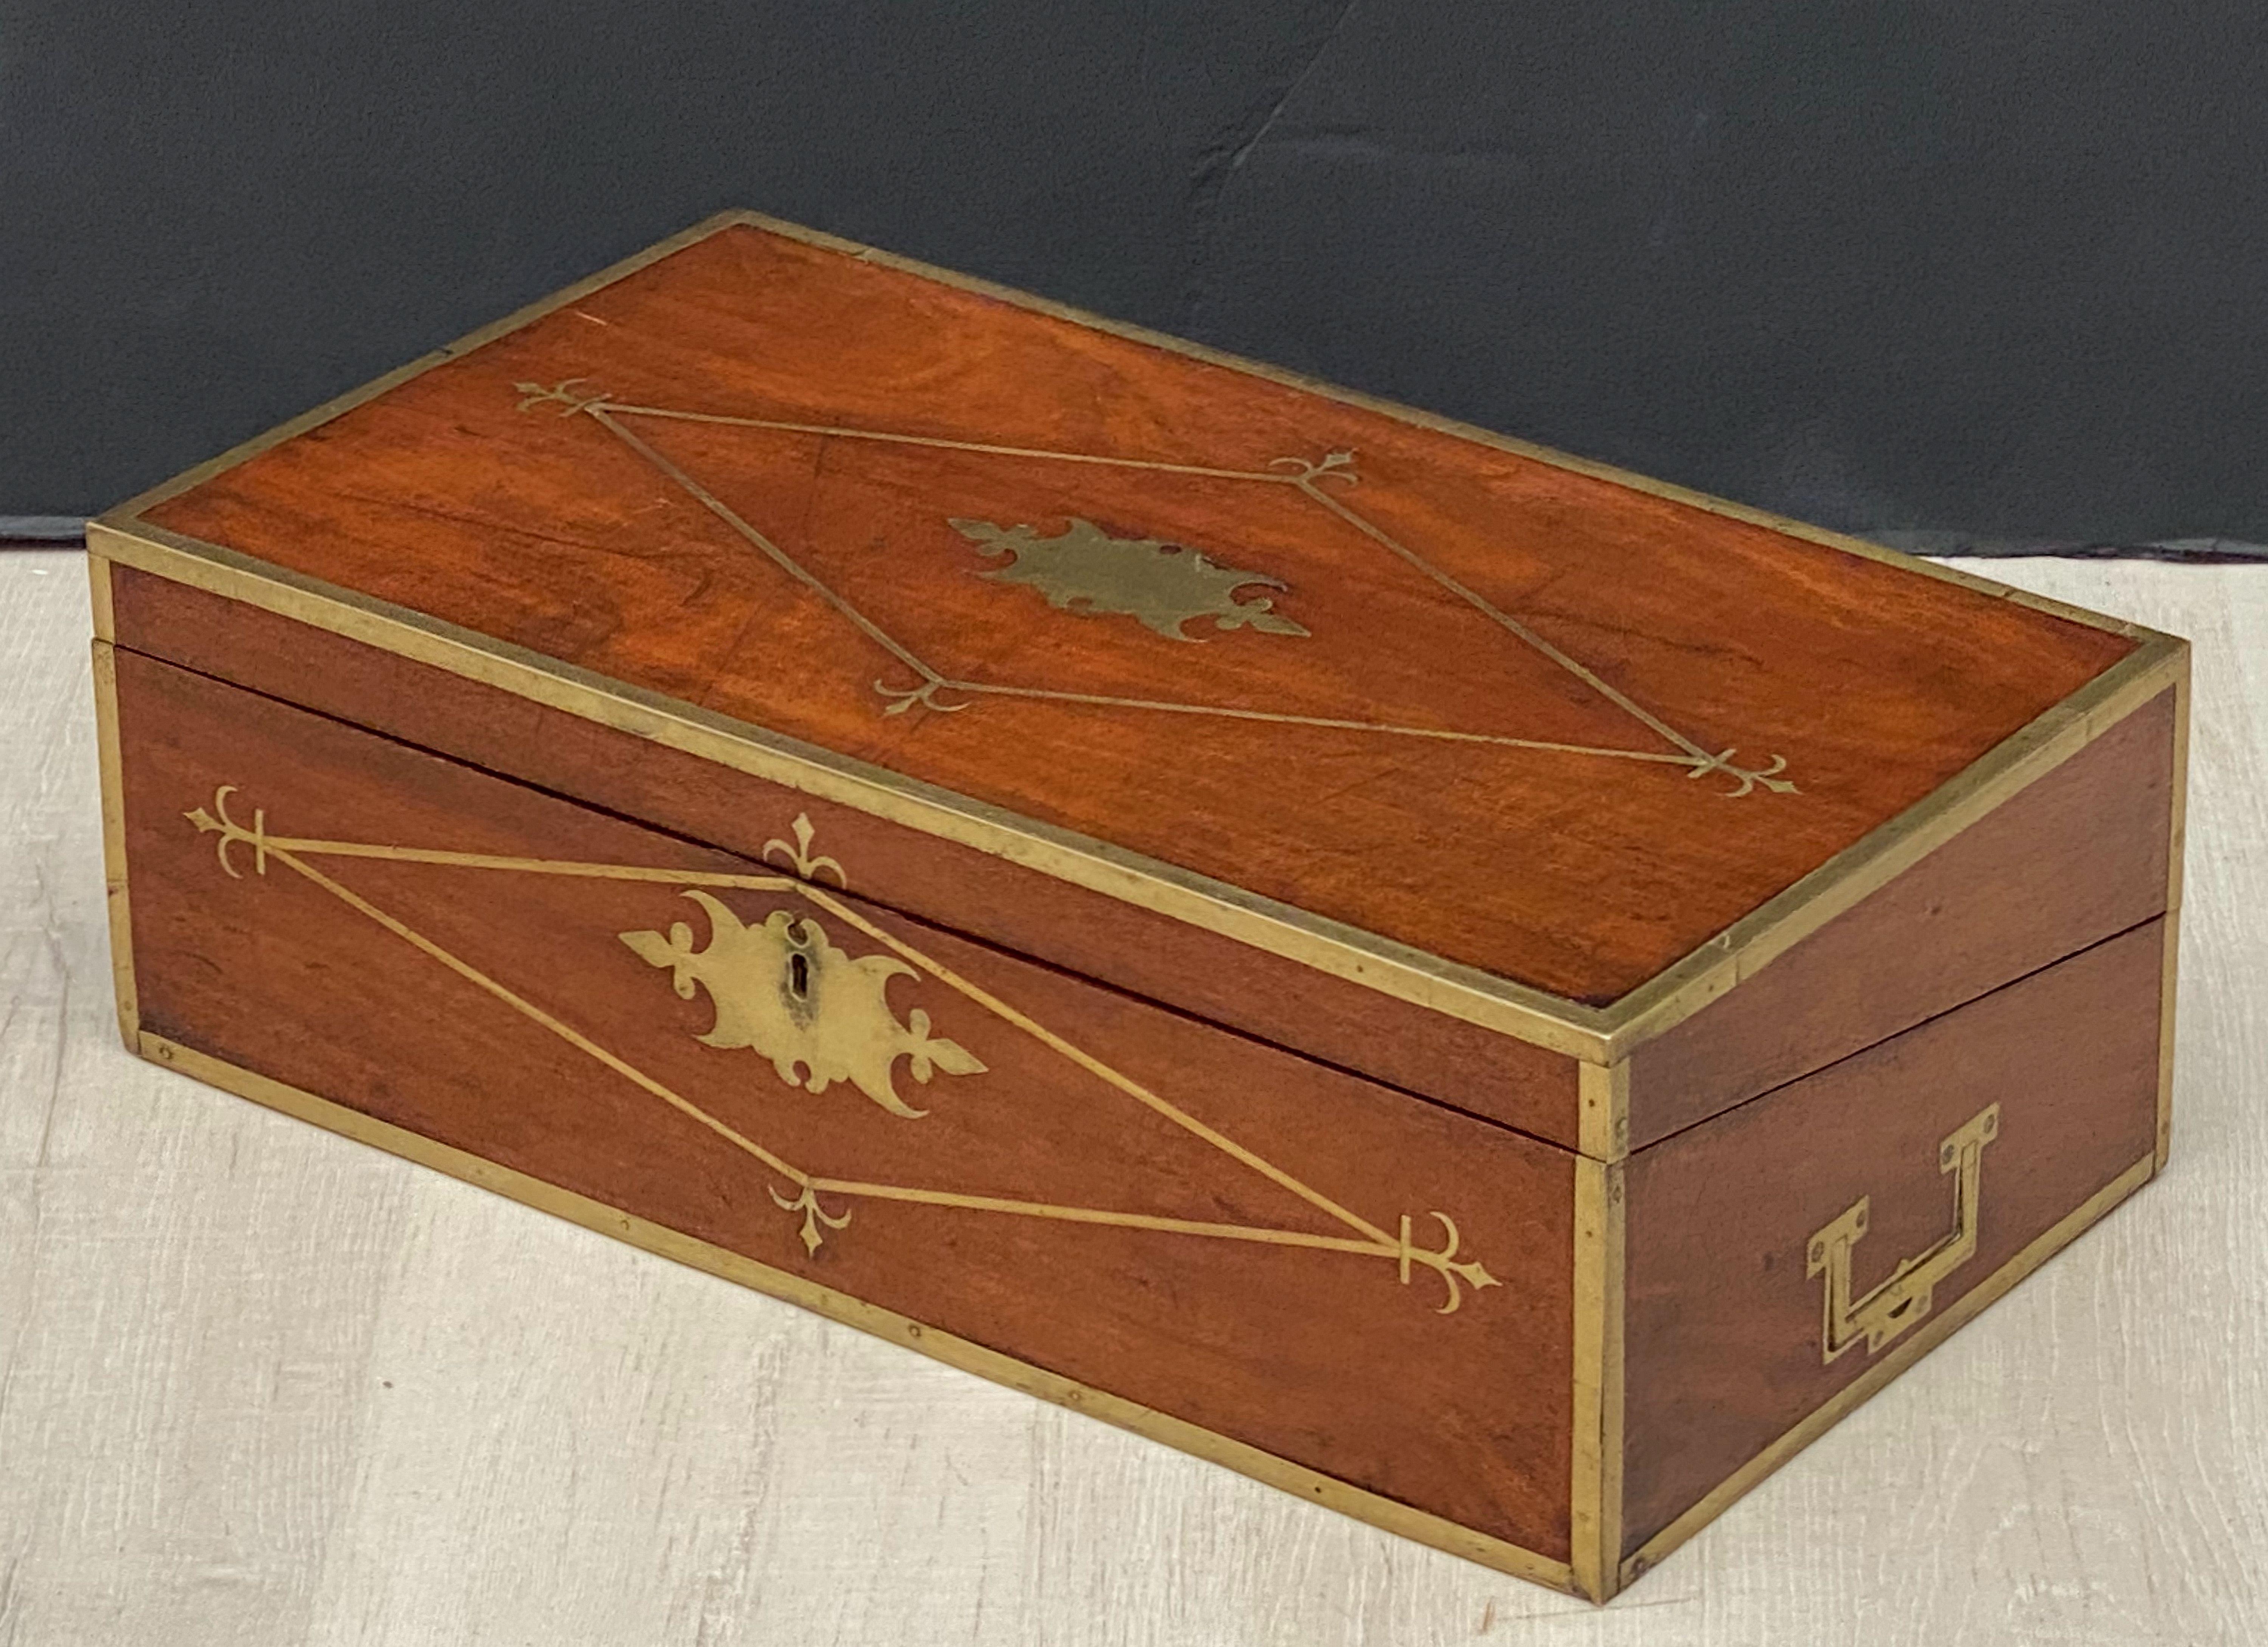 A fine English military officer's writing slope (or Captain's box) of brass-bound mahogany, from the Campaign Era, featuring a two-section hinged interior that opens to become a writing desk, with compartments for inkwells, writing pens, and